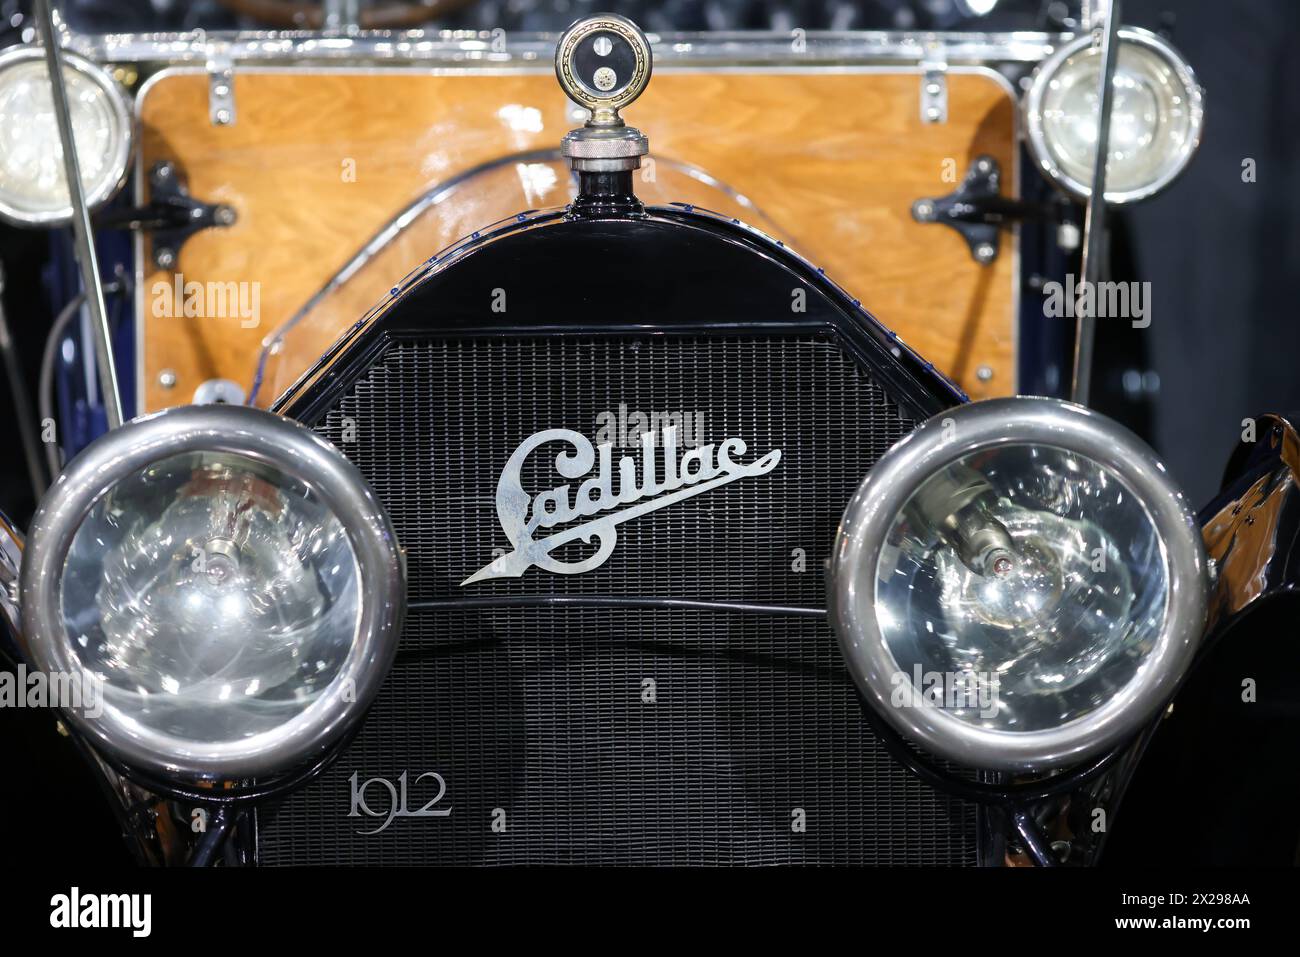 Bucharest, Romania - April 21, 2024: Details with the front part and emblem of a retro 1912 Cadillac Model 30 Torpedo Touring car. Stock Photo